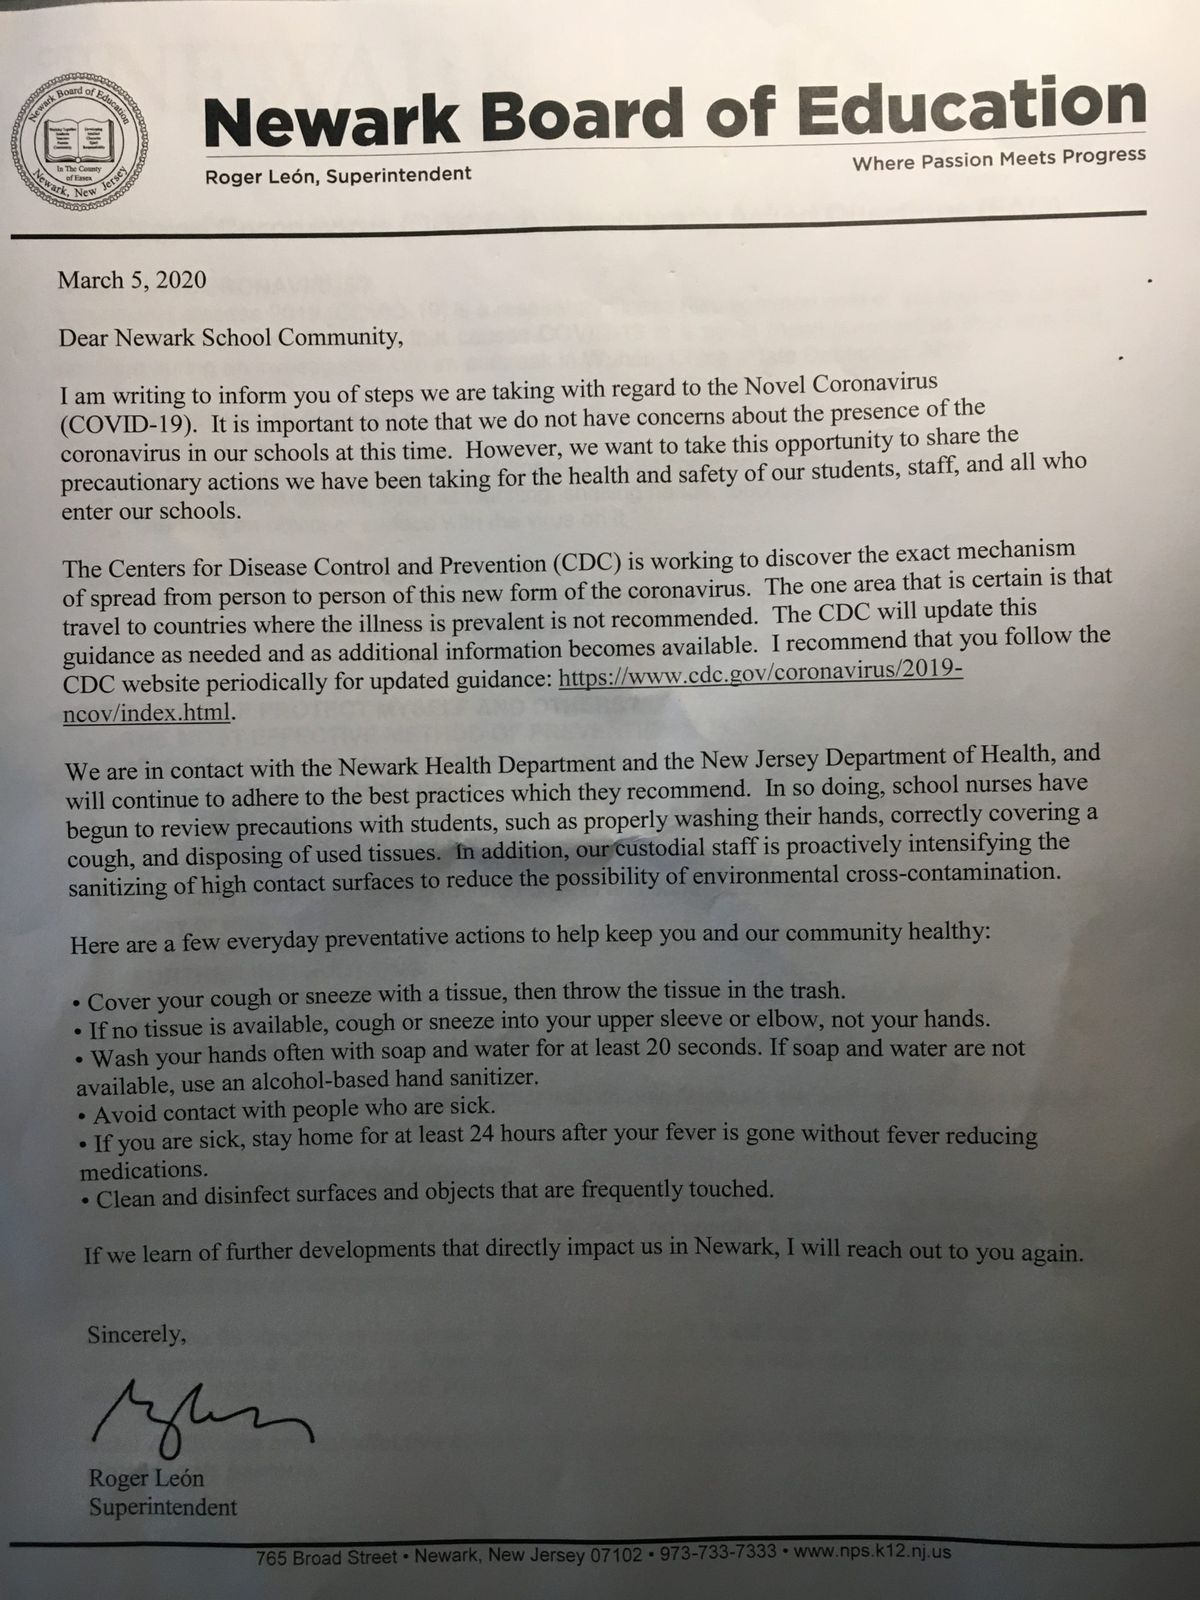 The letter distributed to Newark Public Schools students and employees on Thursday.